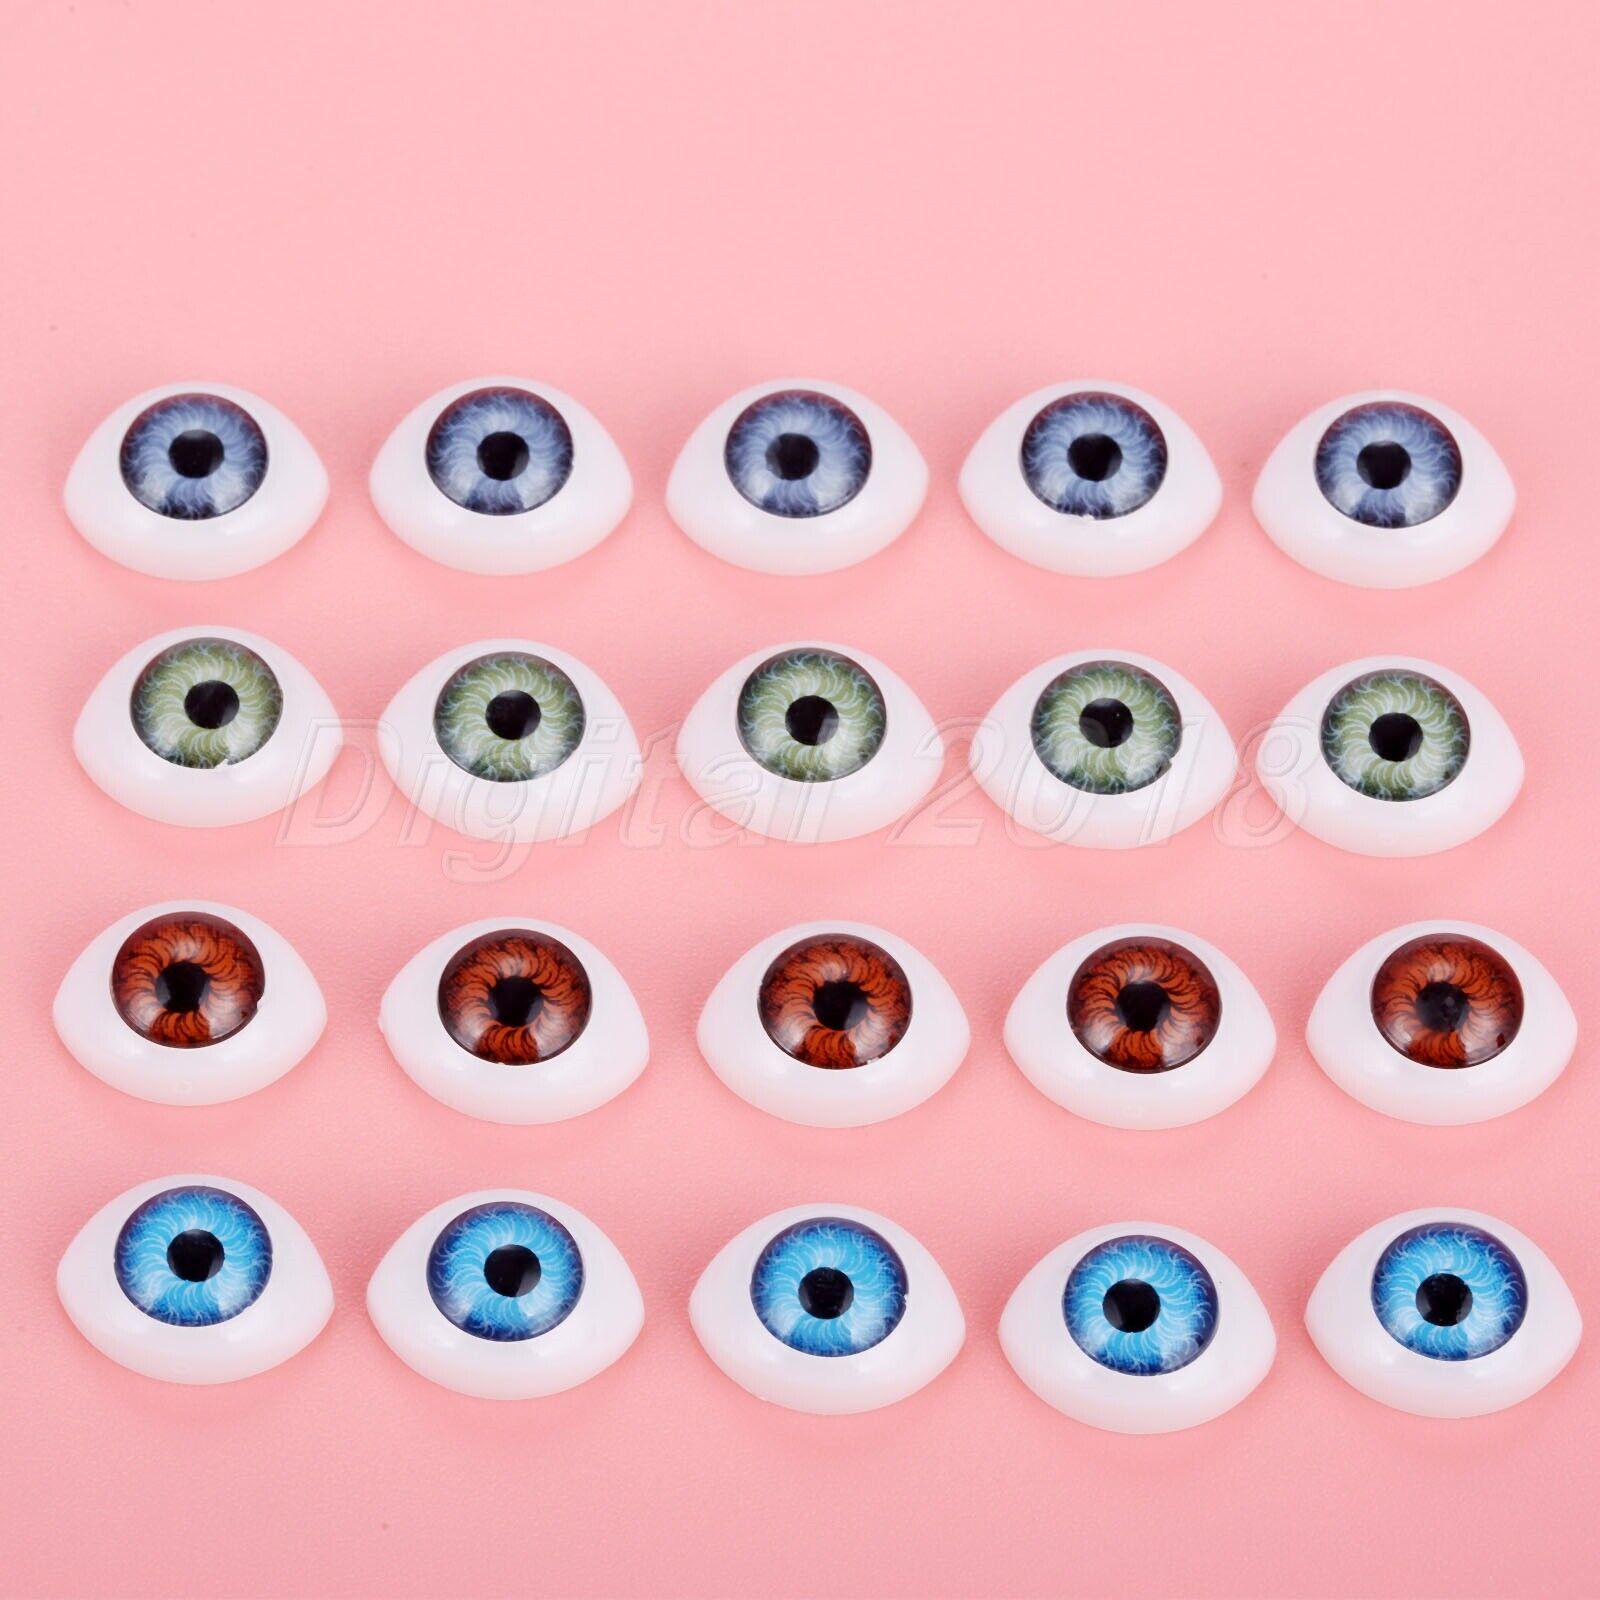 100Pcs 0.47"*0.63" Safety Doll Eyes Toys For Doll Making Eyes Doll Accessories Unbranded Does Not Apply - фотография #2